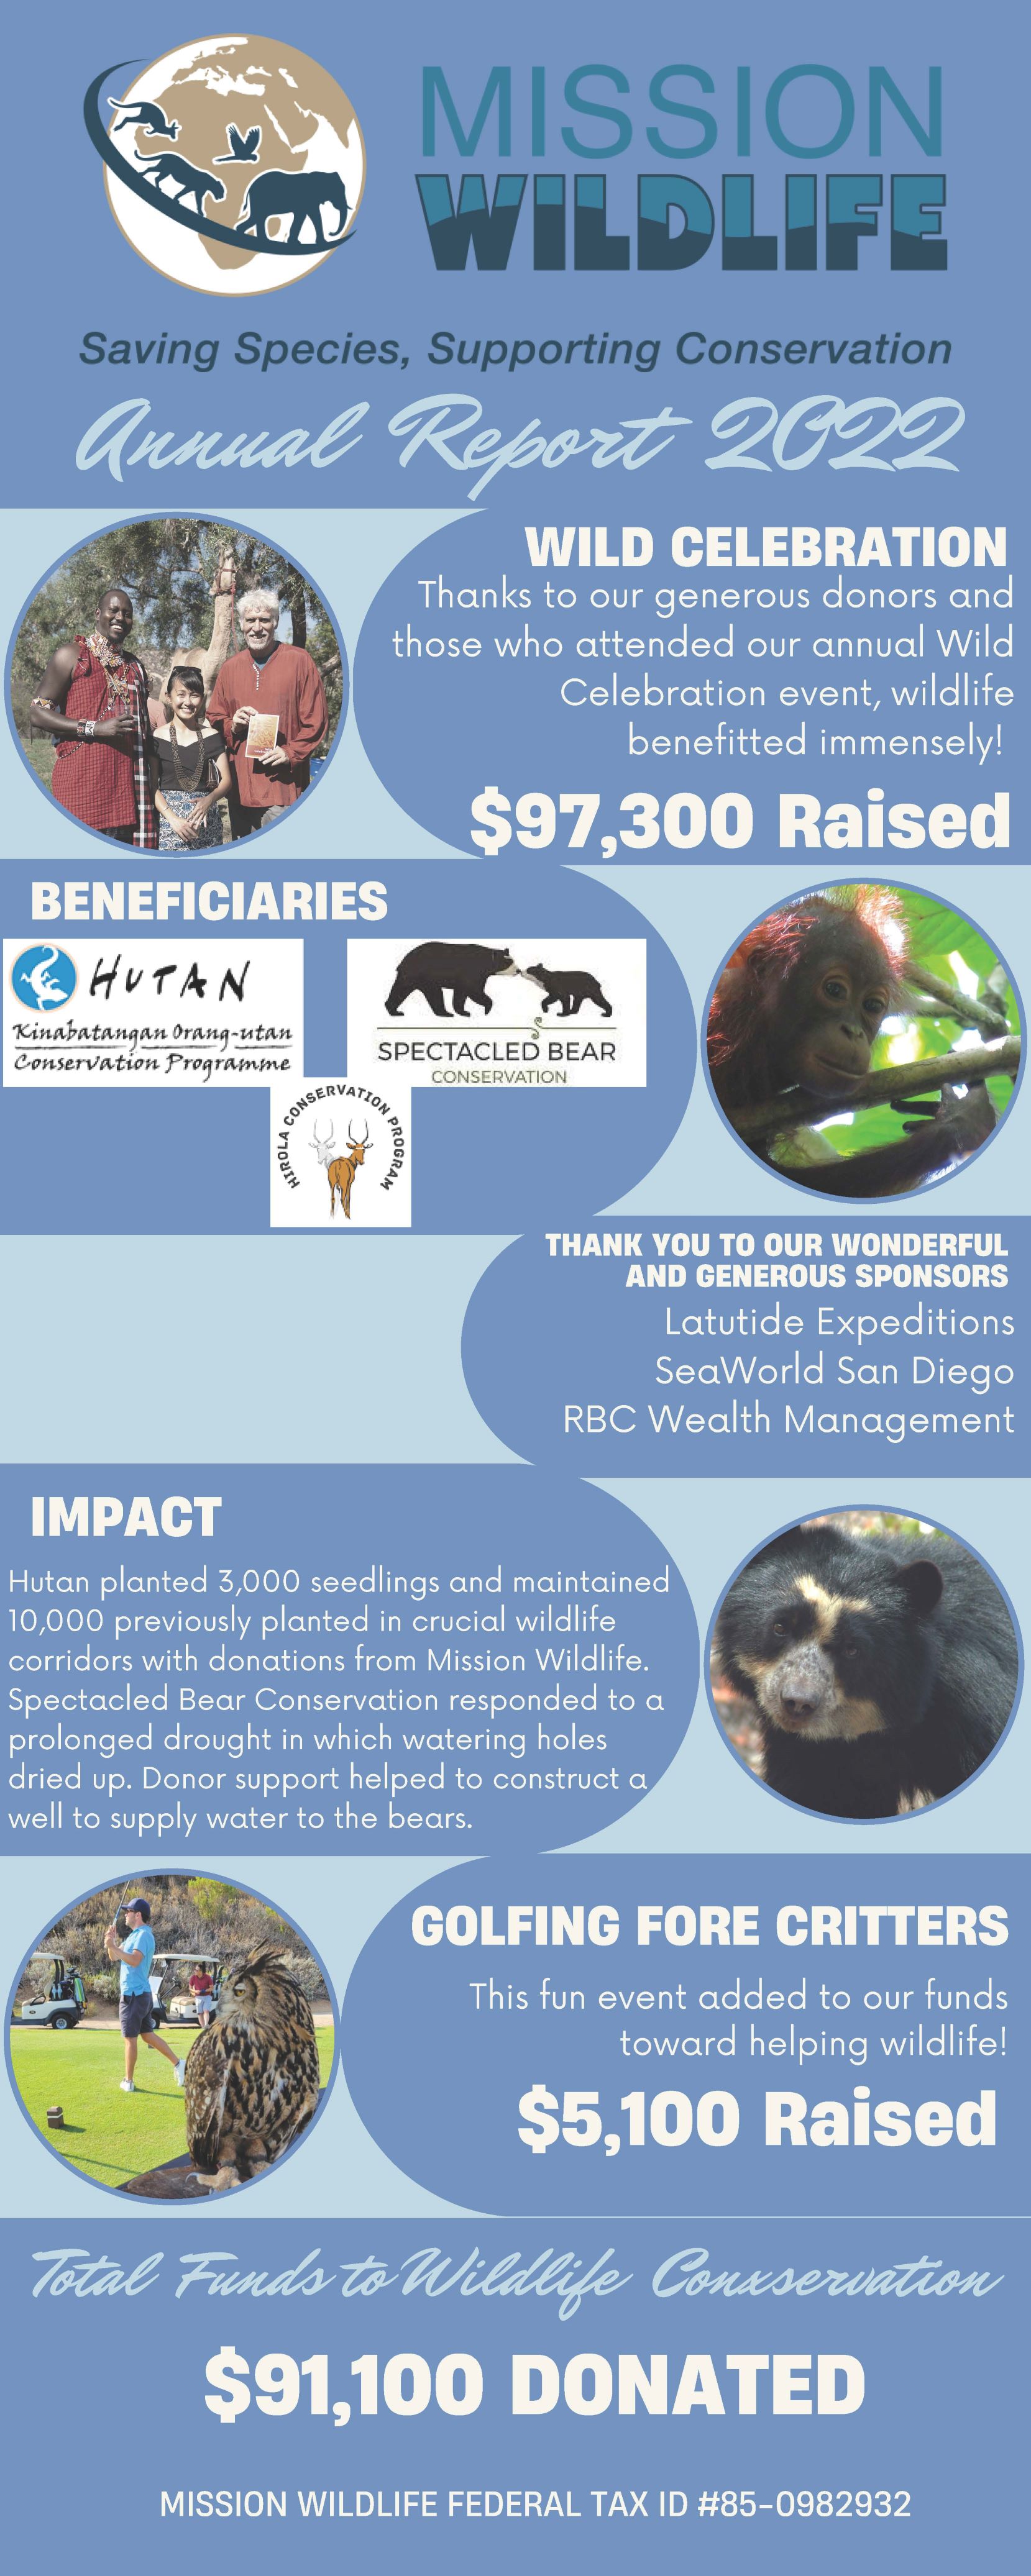 Mission Wildlife Conservation Annual Report